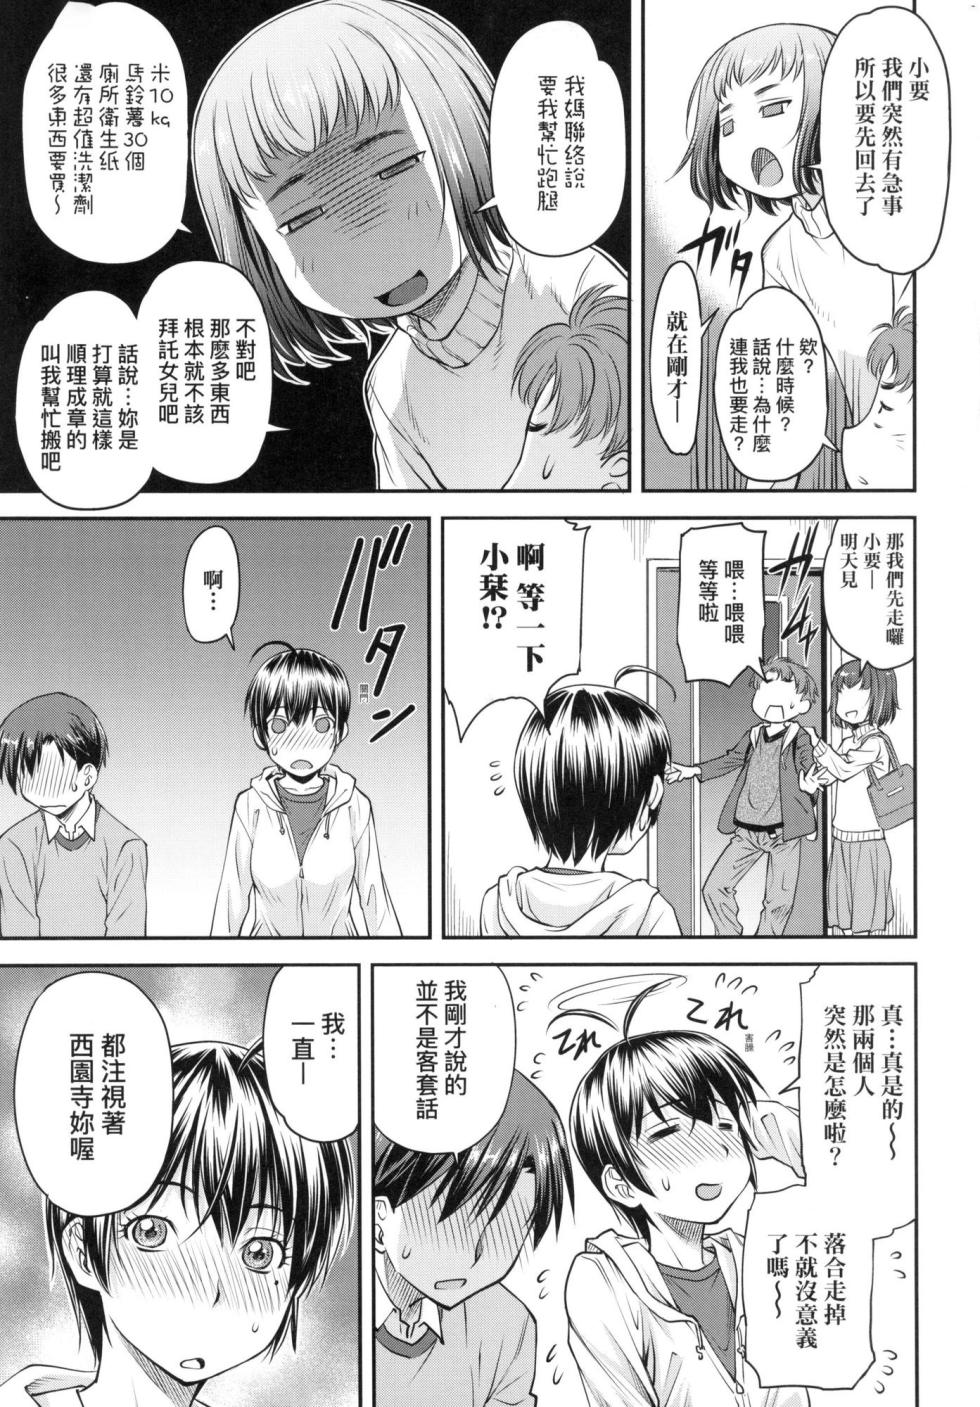 [Nagare Ippon] Kaname Date Jou | 小要開發Date 上 [Chinese] [Decensored] - Page 17